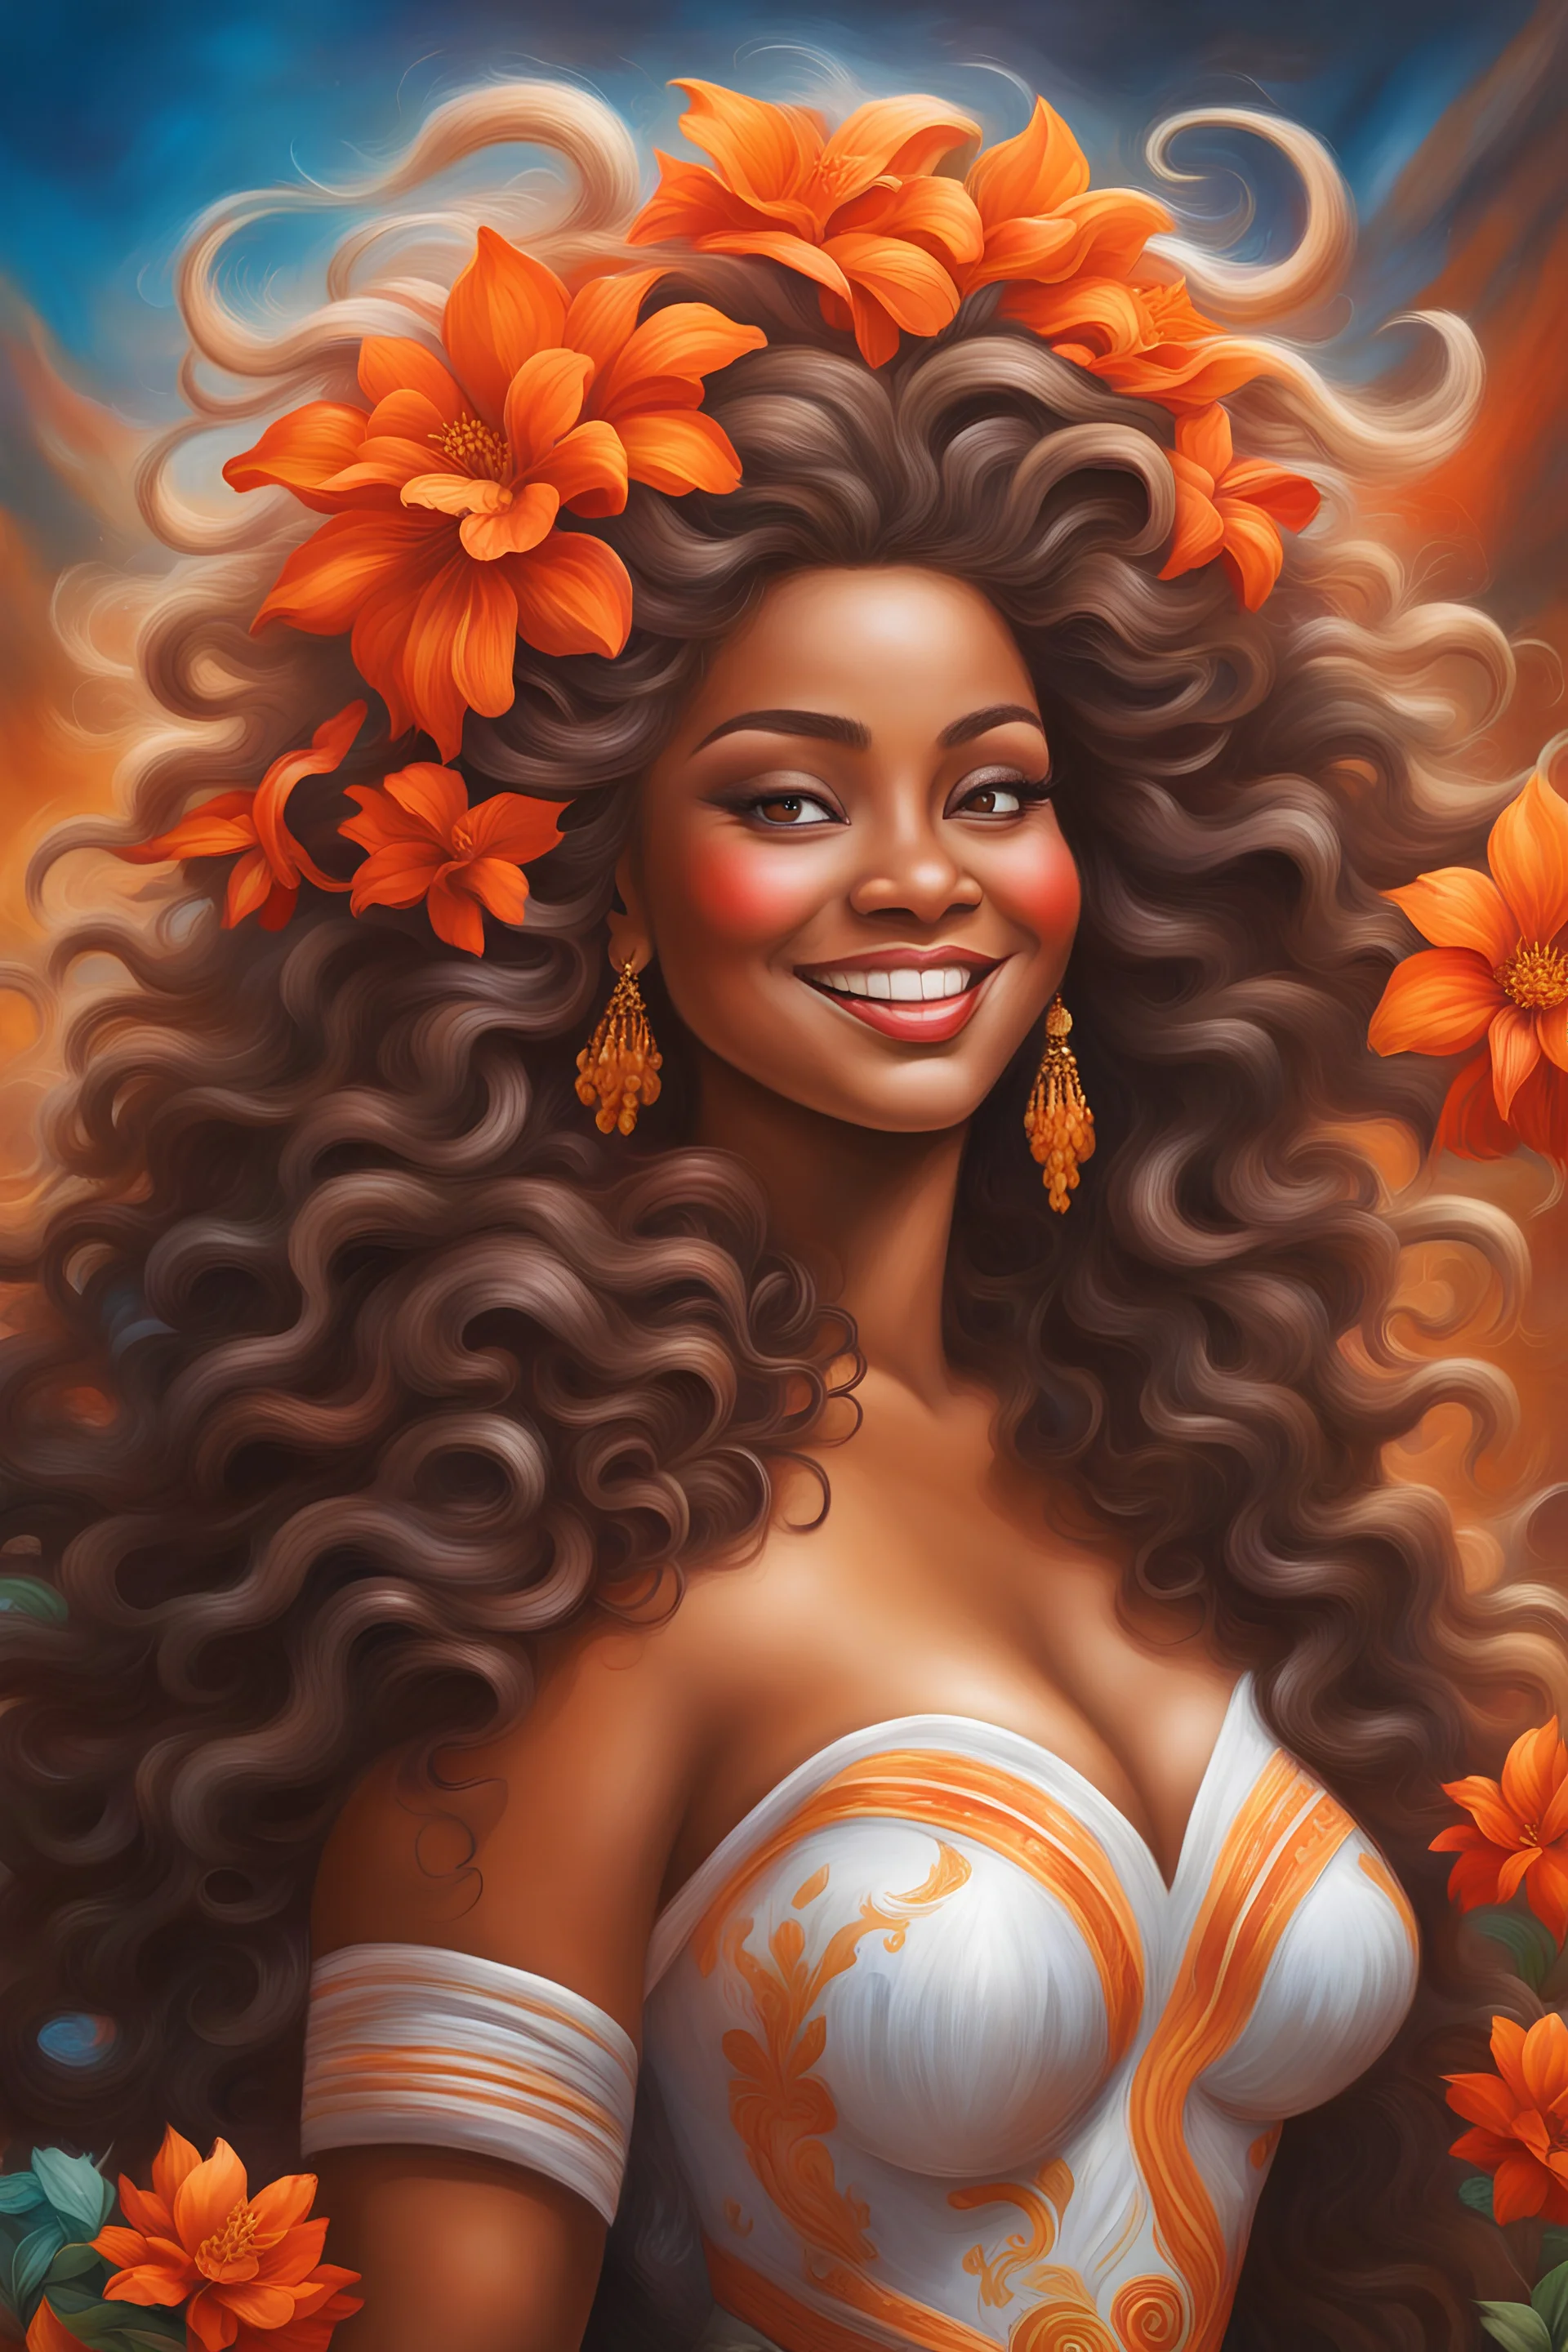 vibrant chalk art oil painting with airbrush, 8k, cartoon art image of a Zulu curvy female looking to the side smiling with a large mane of curly brown hair flowing through the wind, prominent makeup with hazel eyes, highly detailed hair, background orange and red jasmine flowers surrounding her